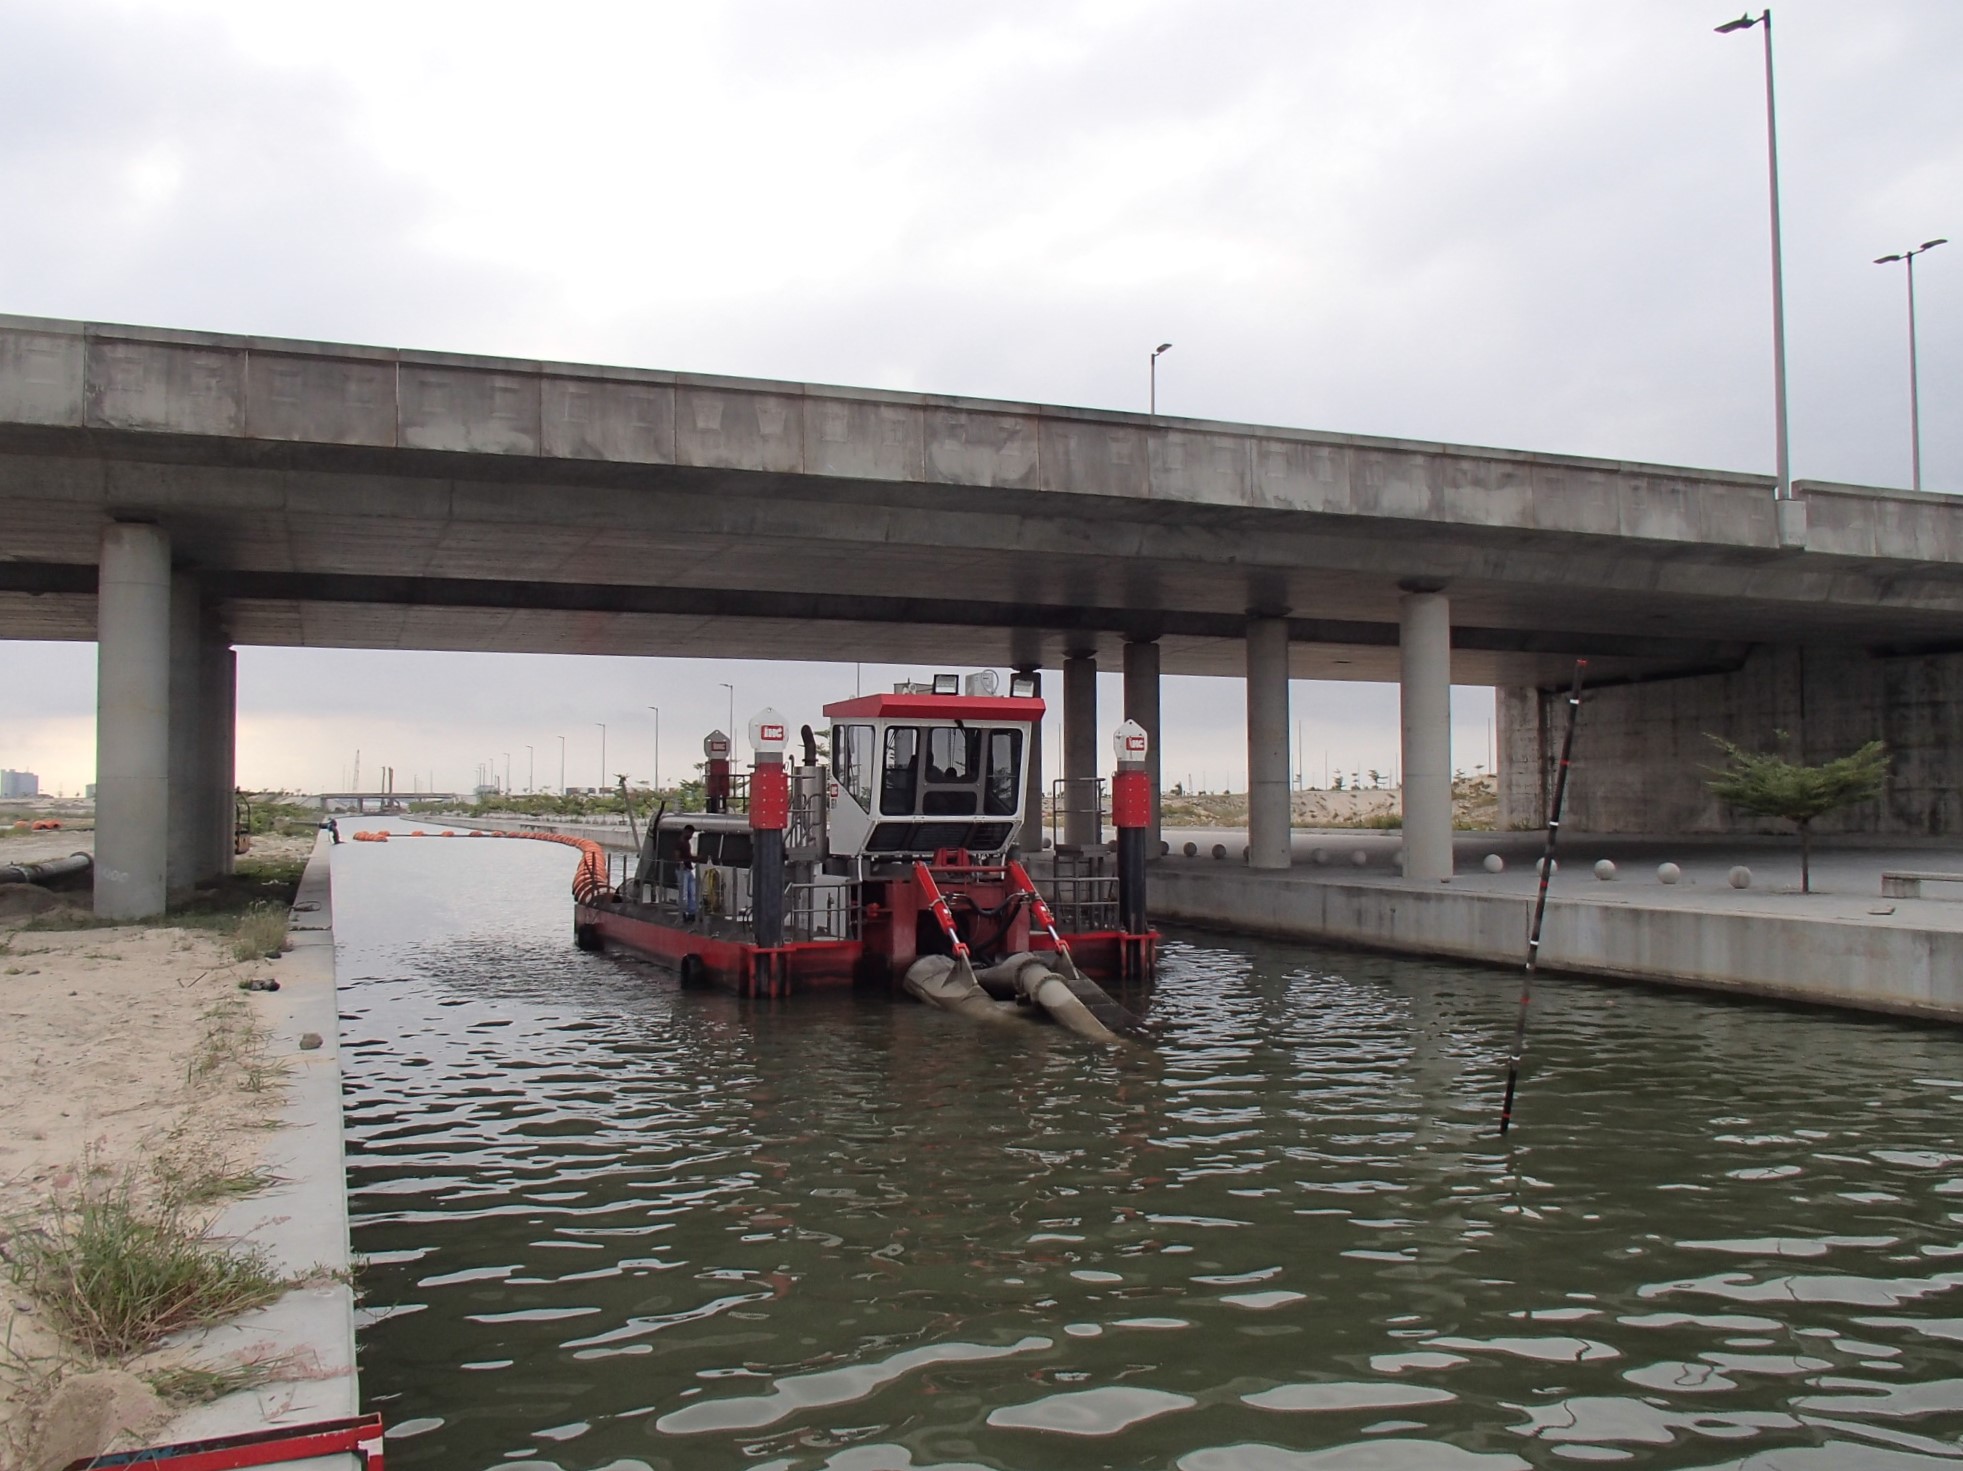 A Beaver® maintaining a channel in Africa